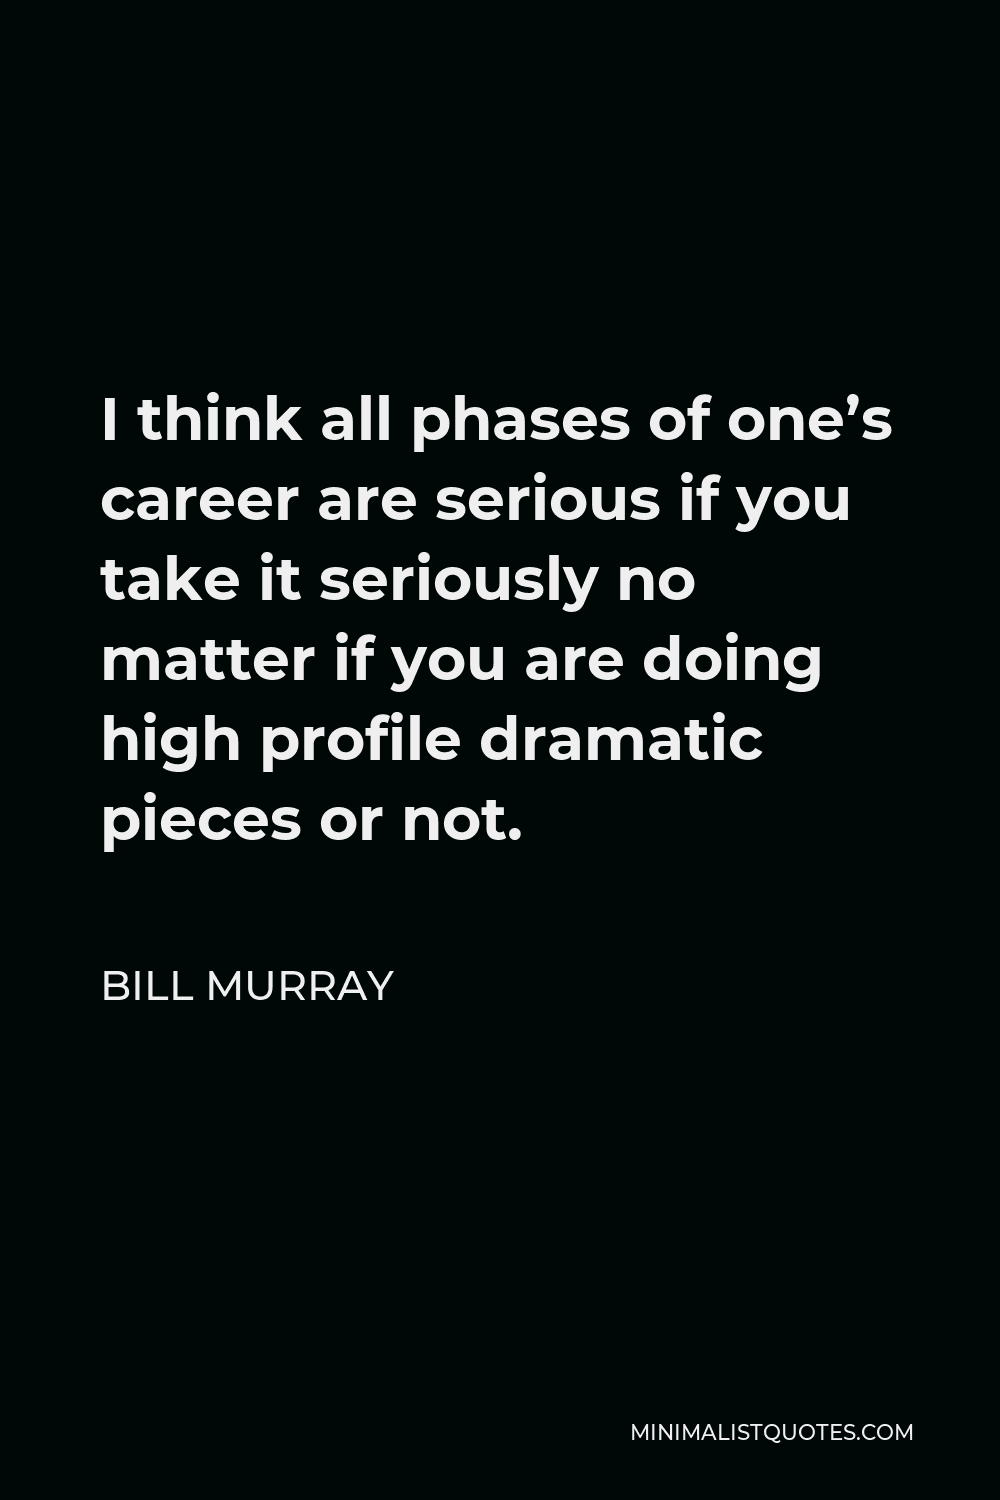 Bill Murray Quote - I think all phases of one’s career are serious if you take it seriously no matter if you are doing high profile dramatic pieces or not.